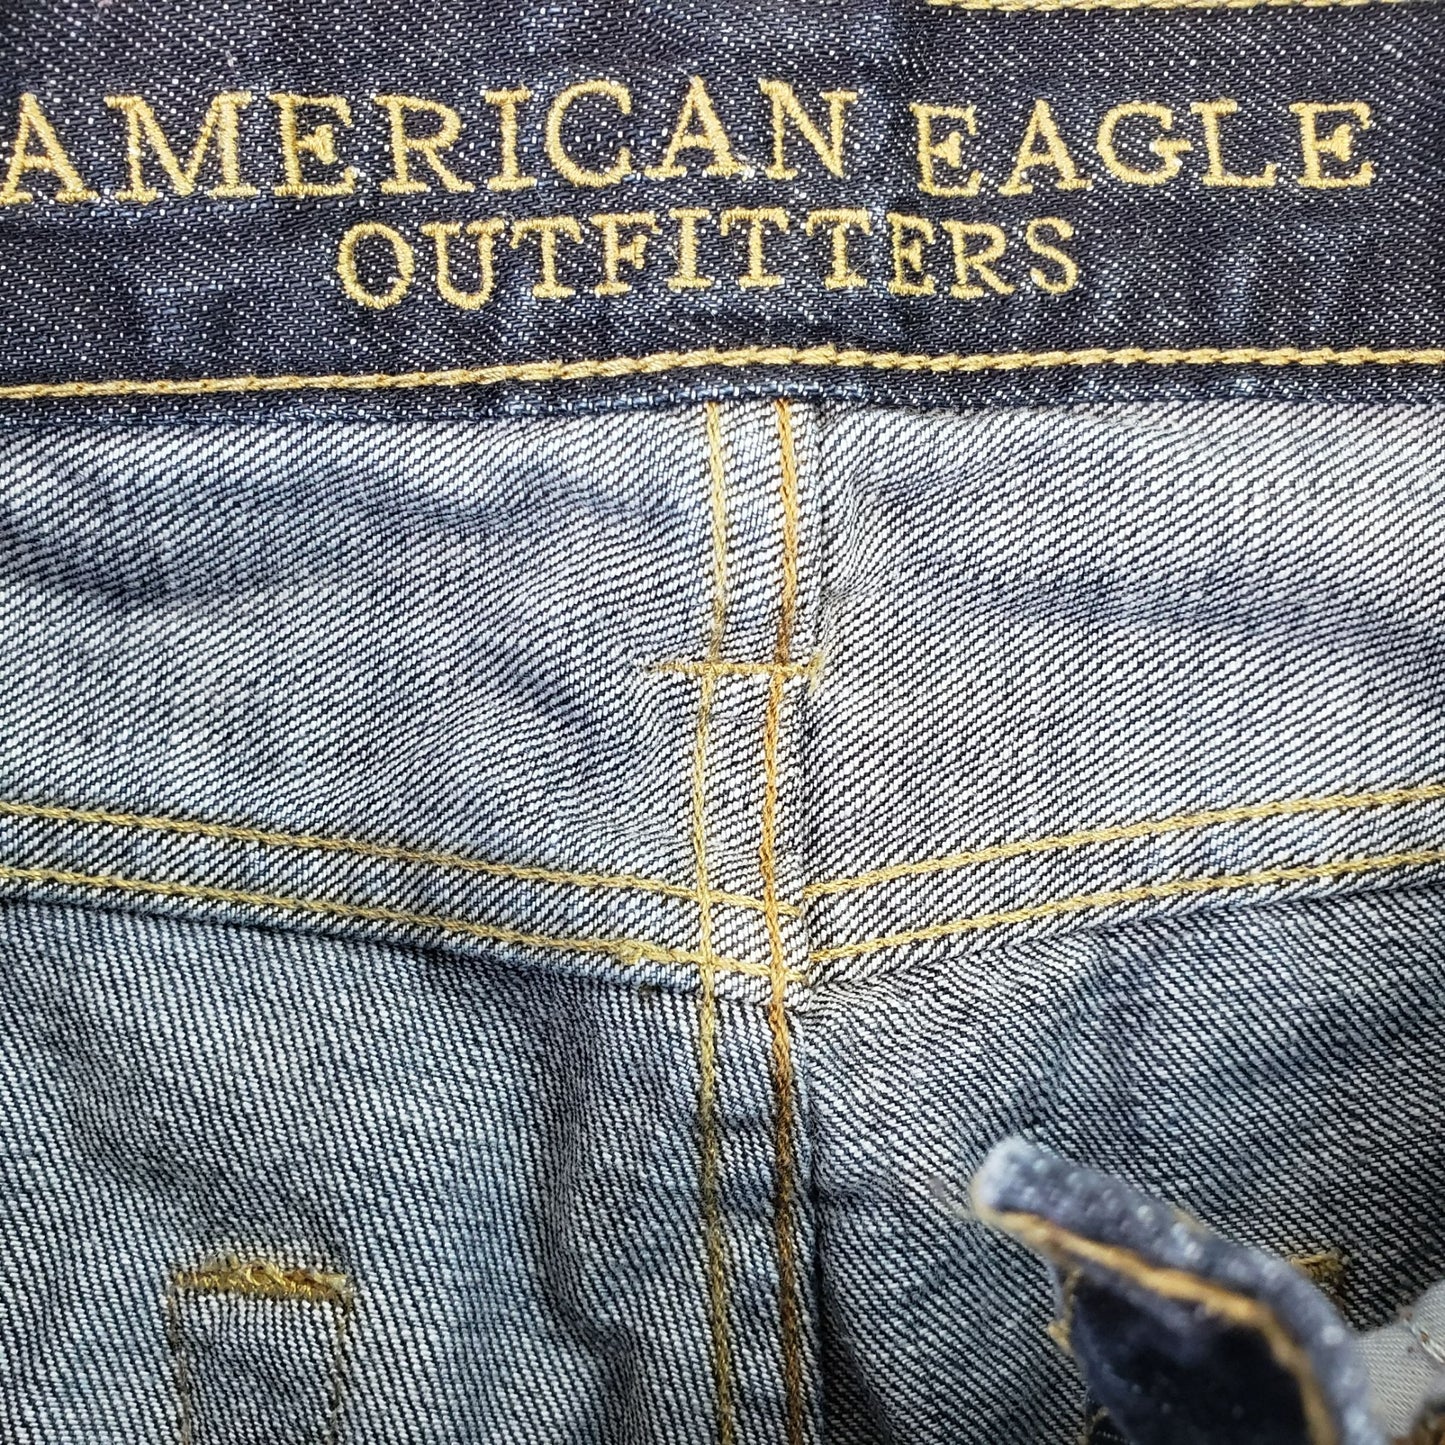 American Eagle Slim Straight Jeans Size 30x32